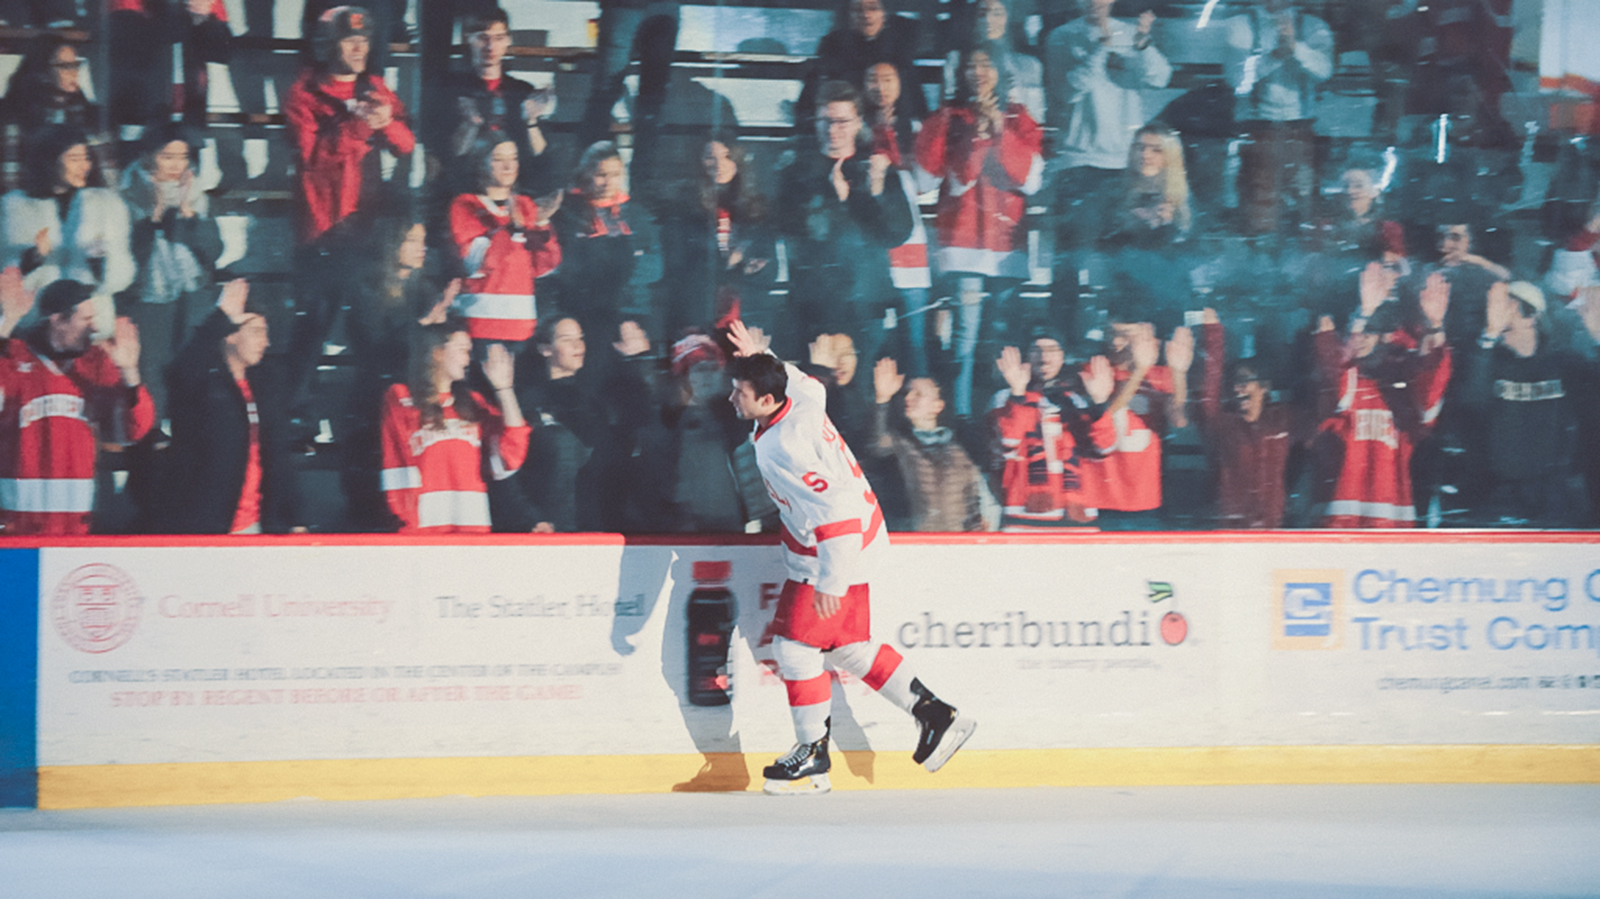 A Cornell men's ice hockey player greets fans at a game